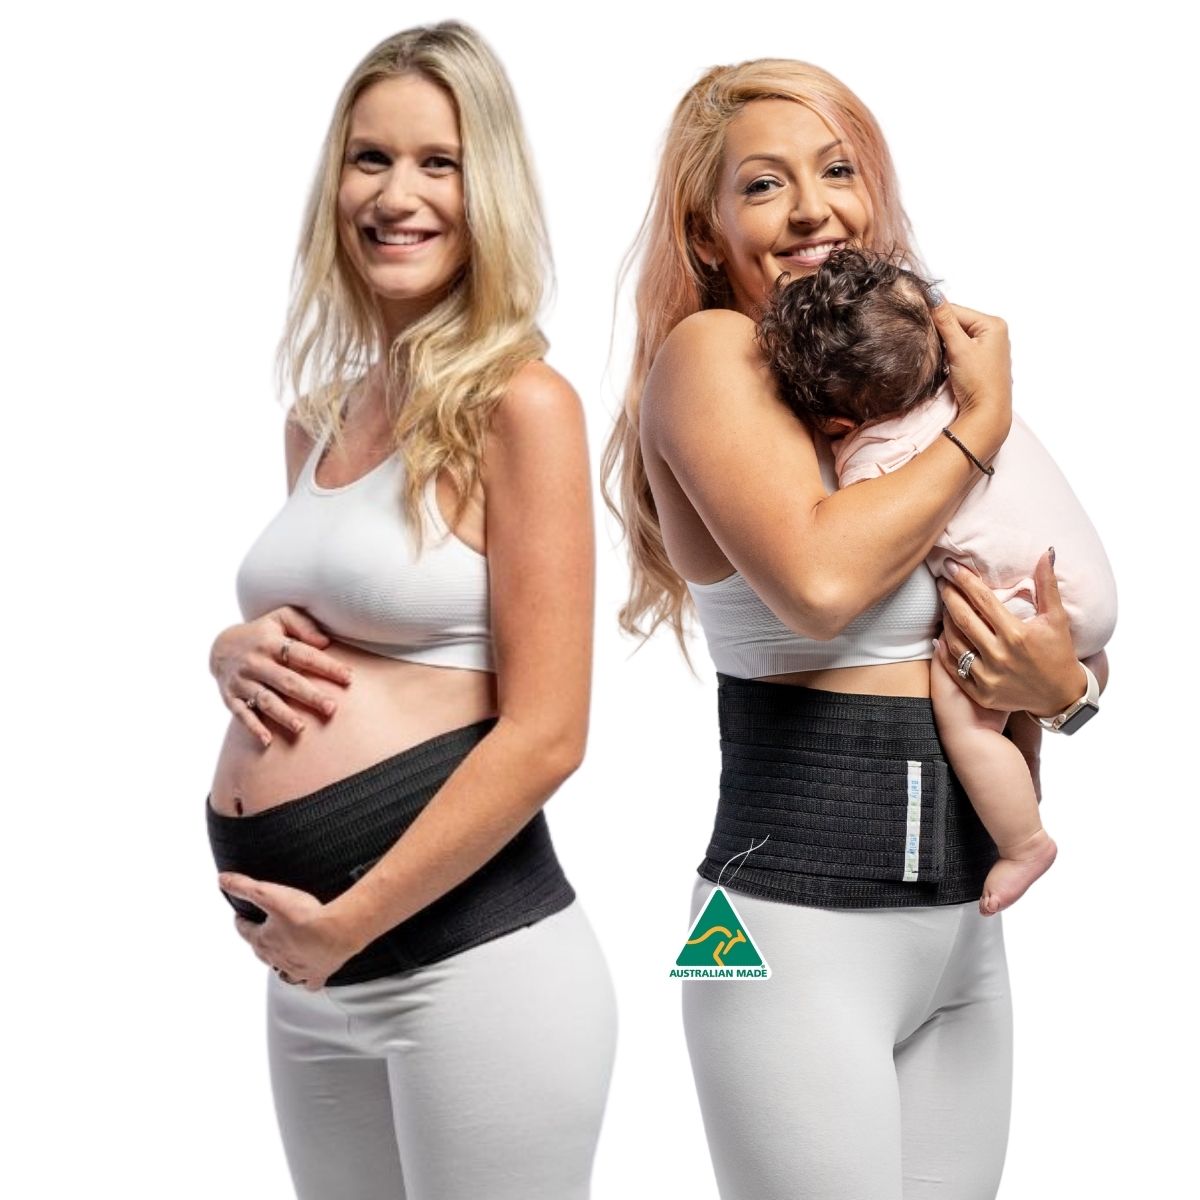 Working out while pregnant: Dos and Don'ts – Belly Bands